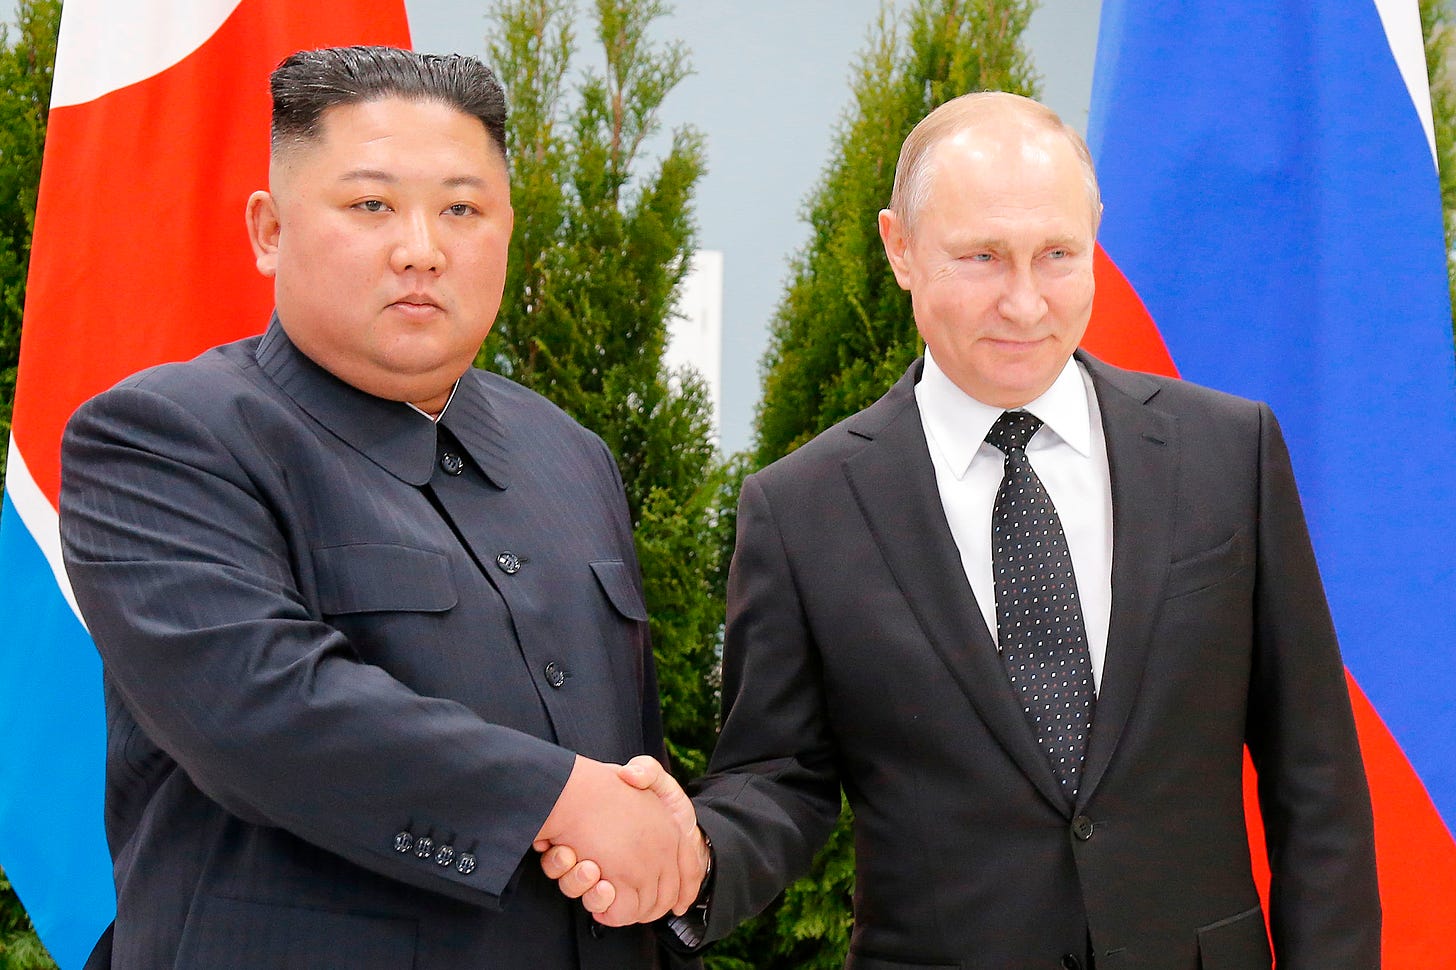 North Korea's Kim Jong Un may meet with Putin in Russia this month